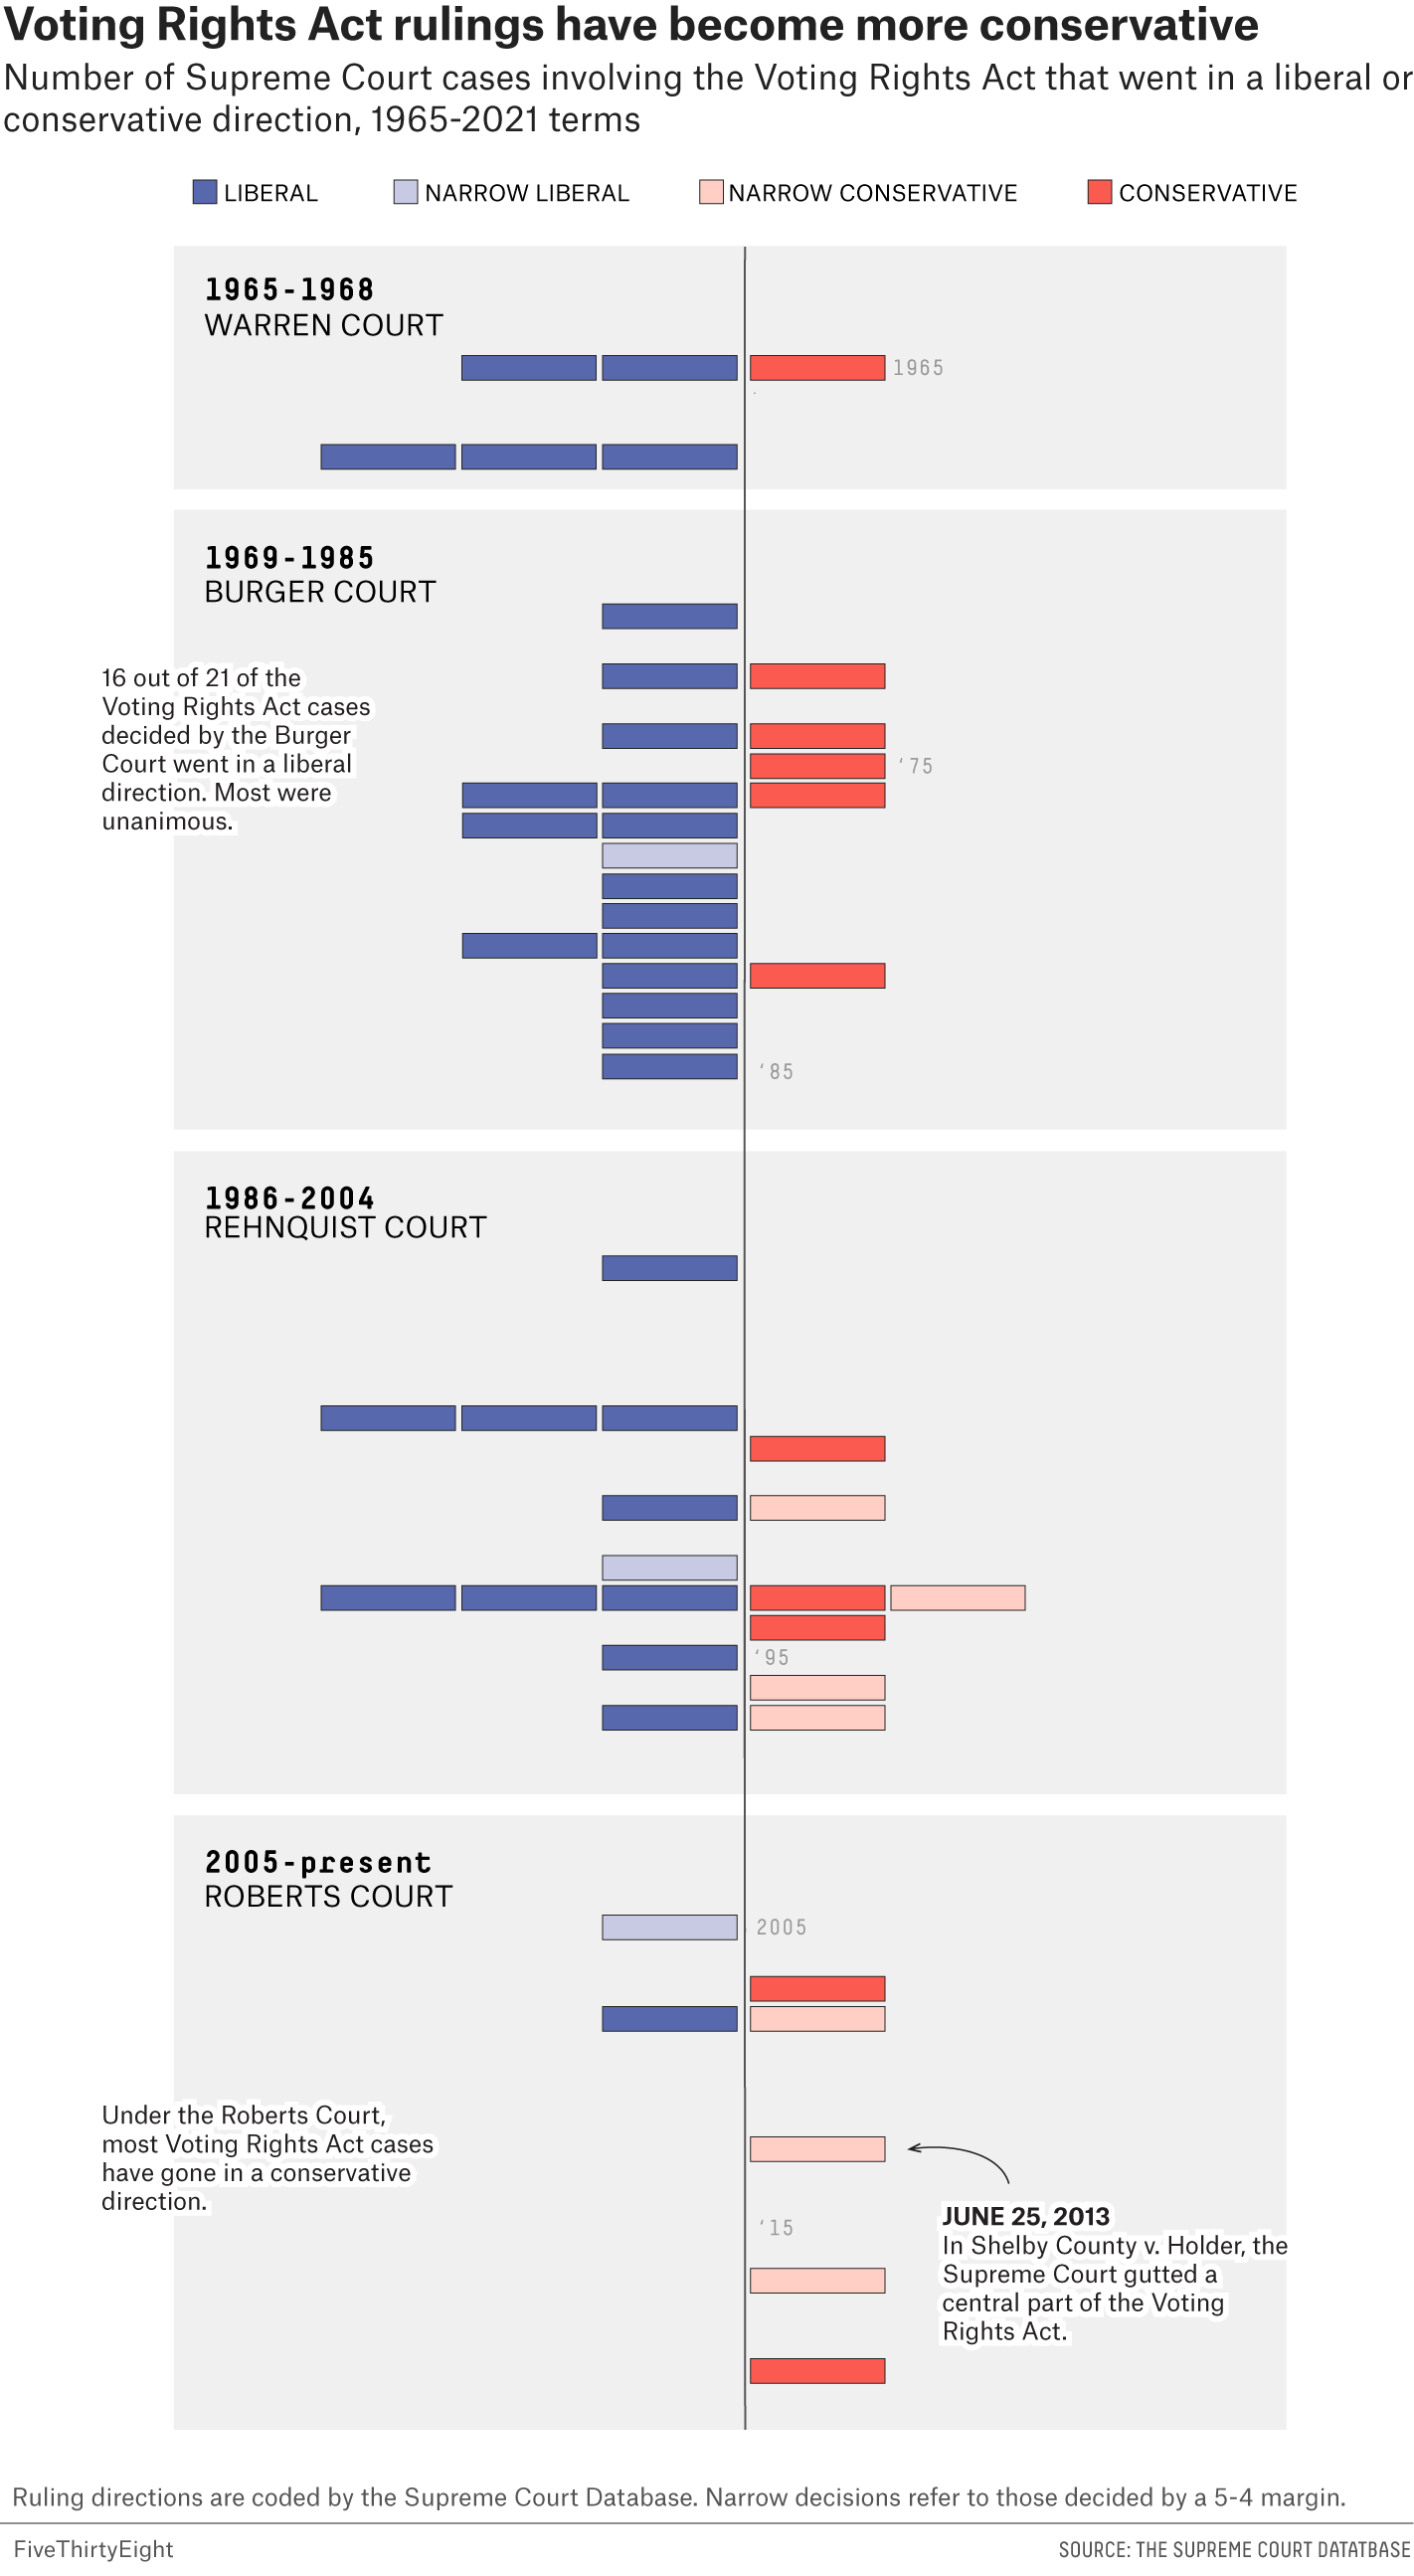 Outcome of Supreme Court rulings related to the Voting Rights Act from 1965-2021 under each of the past four chief justices — Chief Justices Warren, Burger, Rehnquist and Roberts — that went in a liberal or conservative direction.